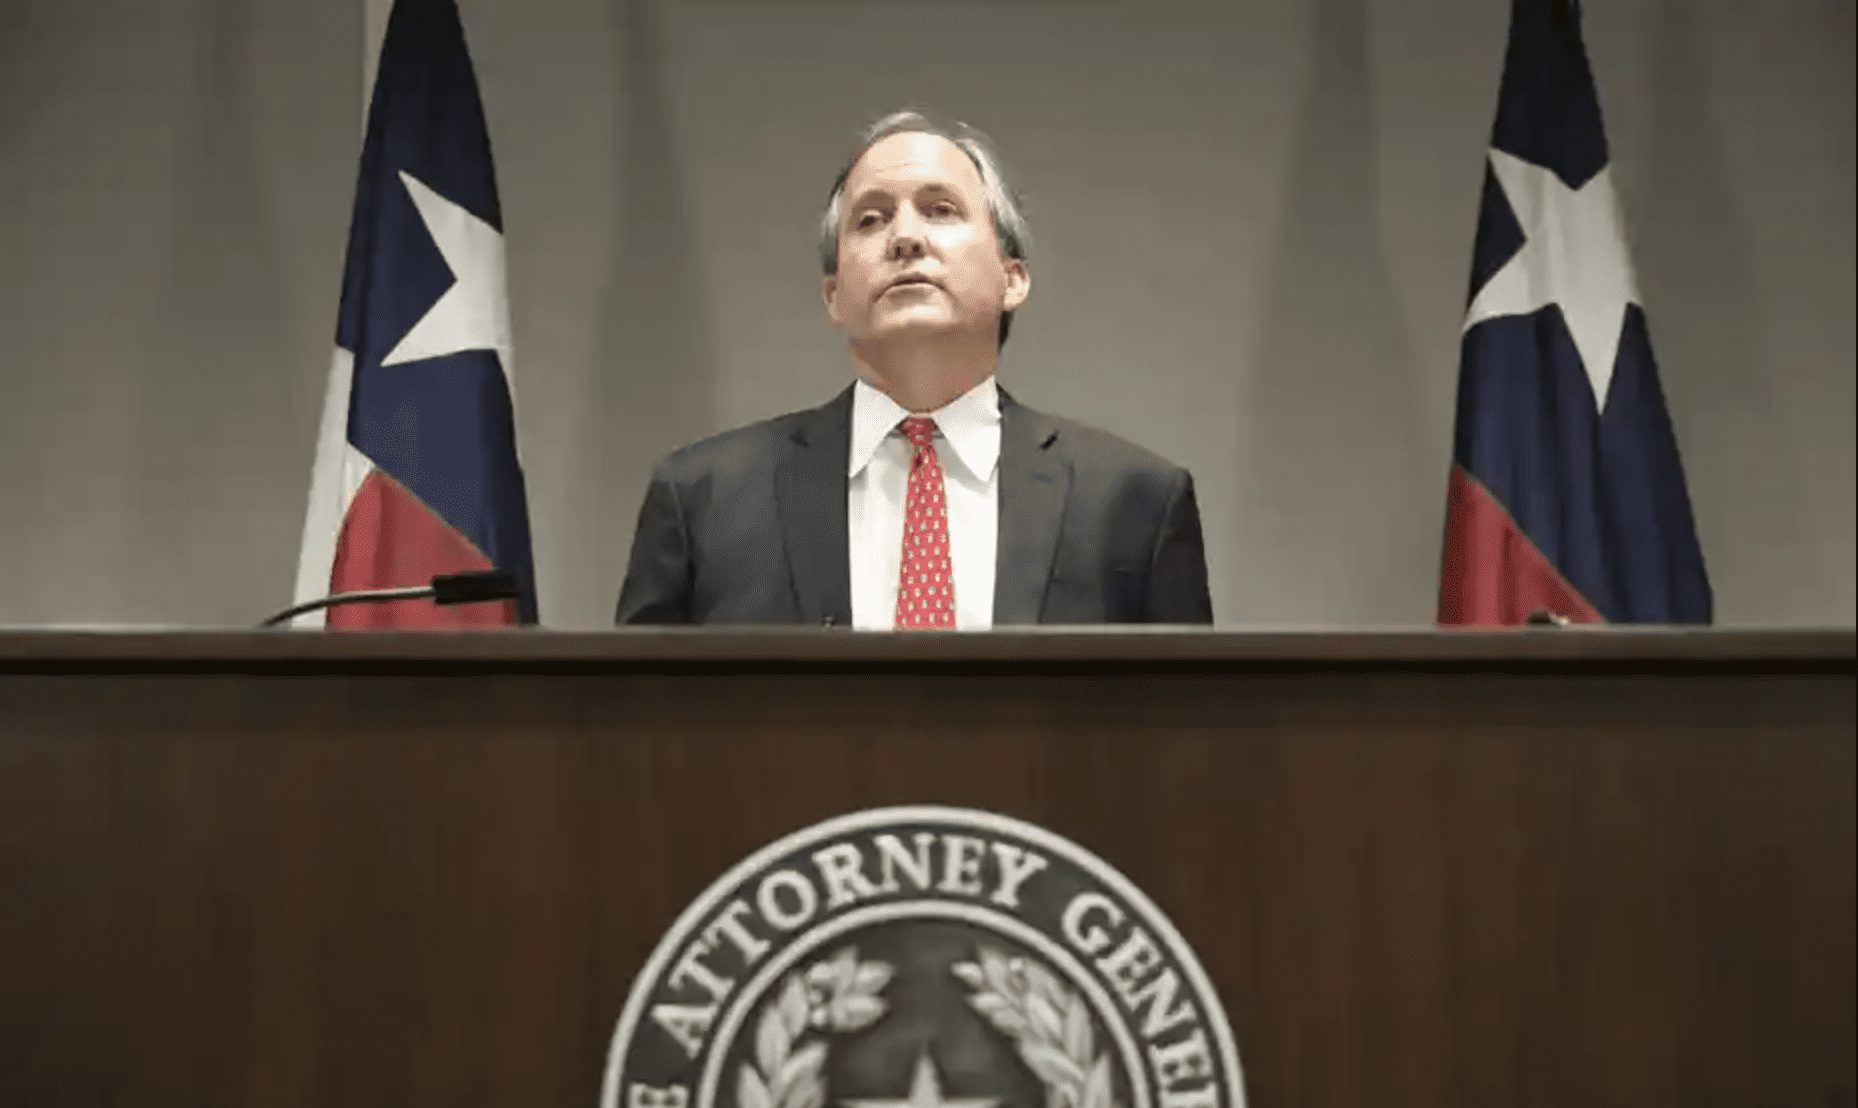 Paxton Asks Texas Supreme Court to Vacate Order Allowing Abortions to Continue